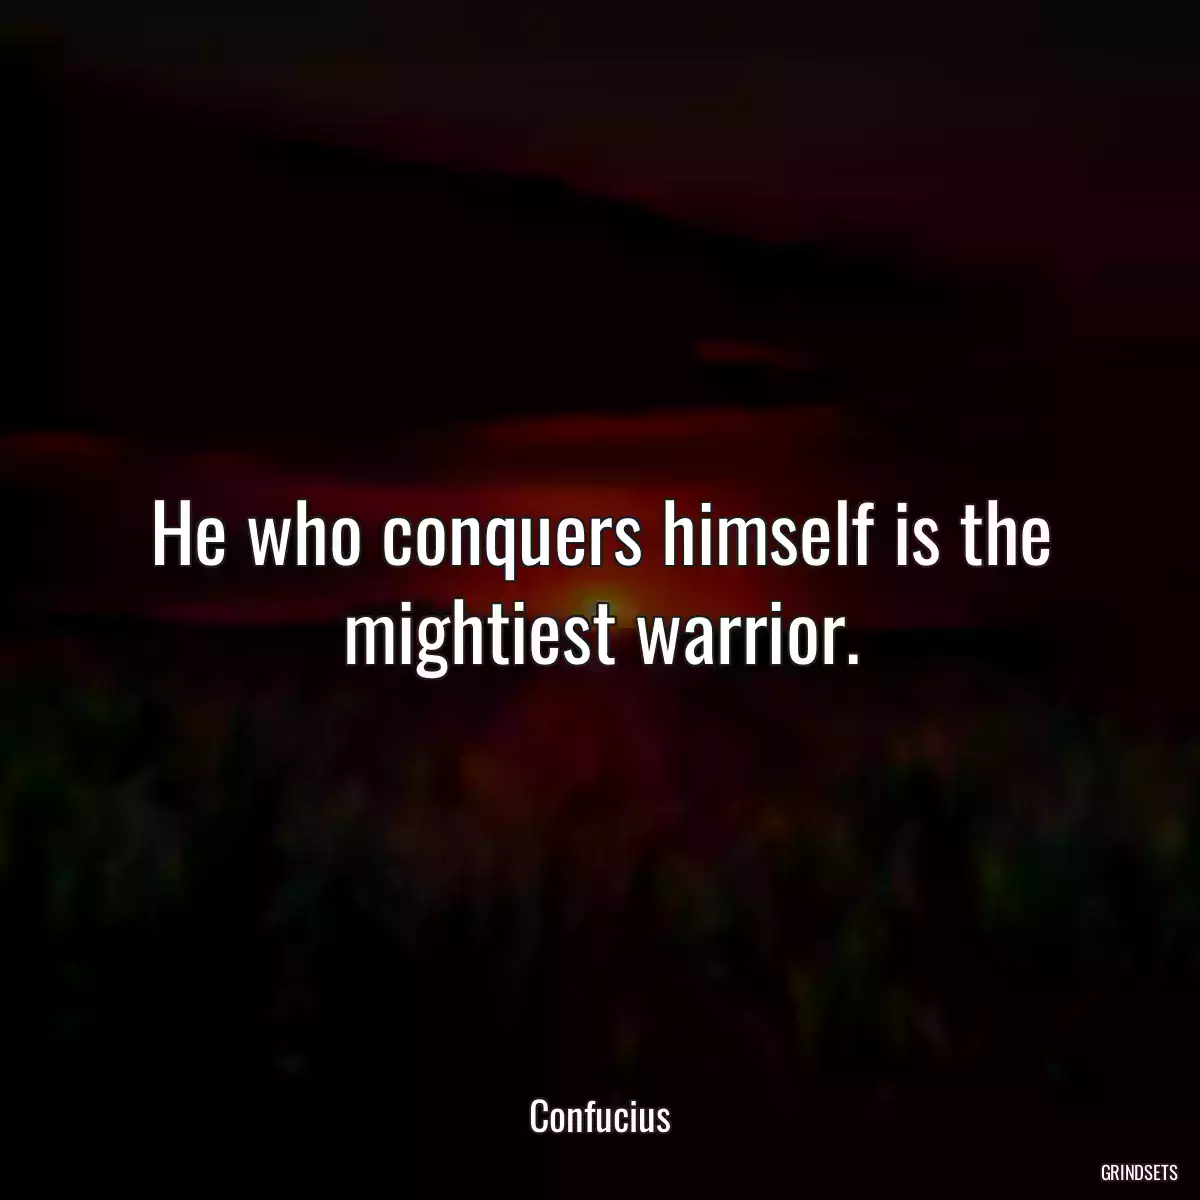 He who conquers himself is the mightiest warrior.